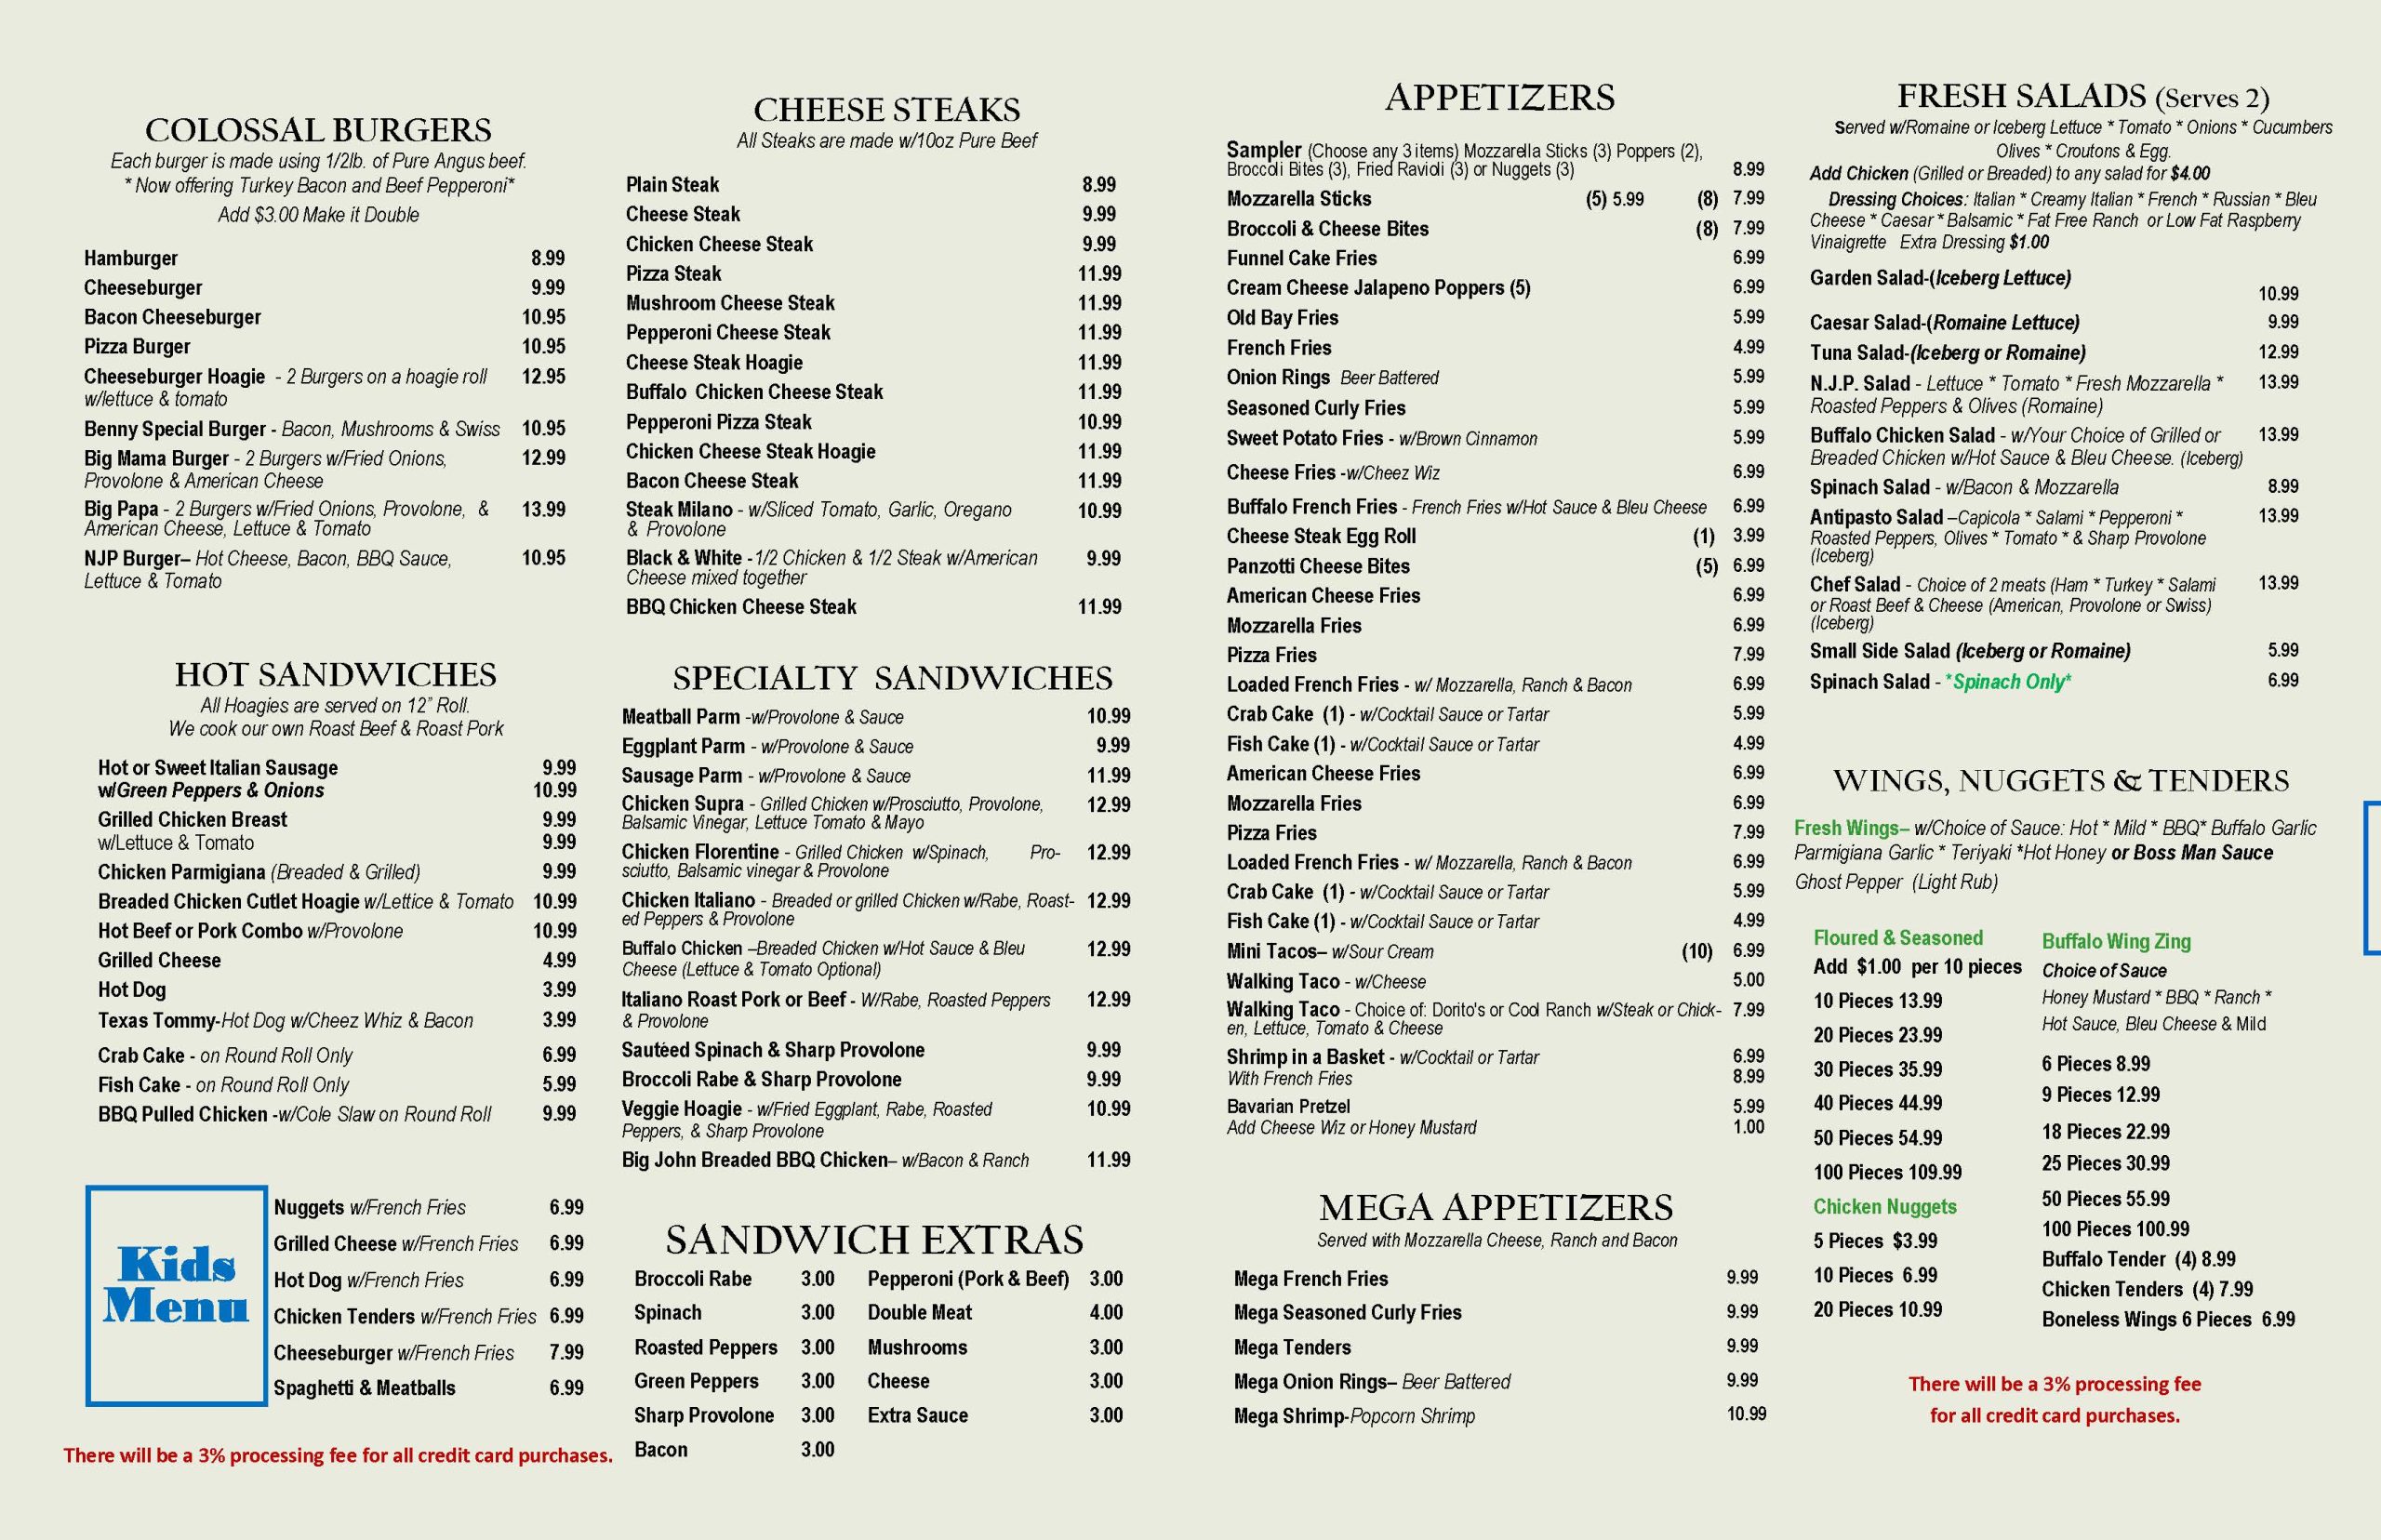 A menu for a restaurant with different prices.